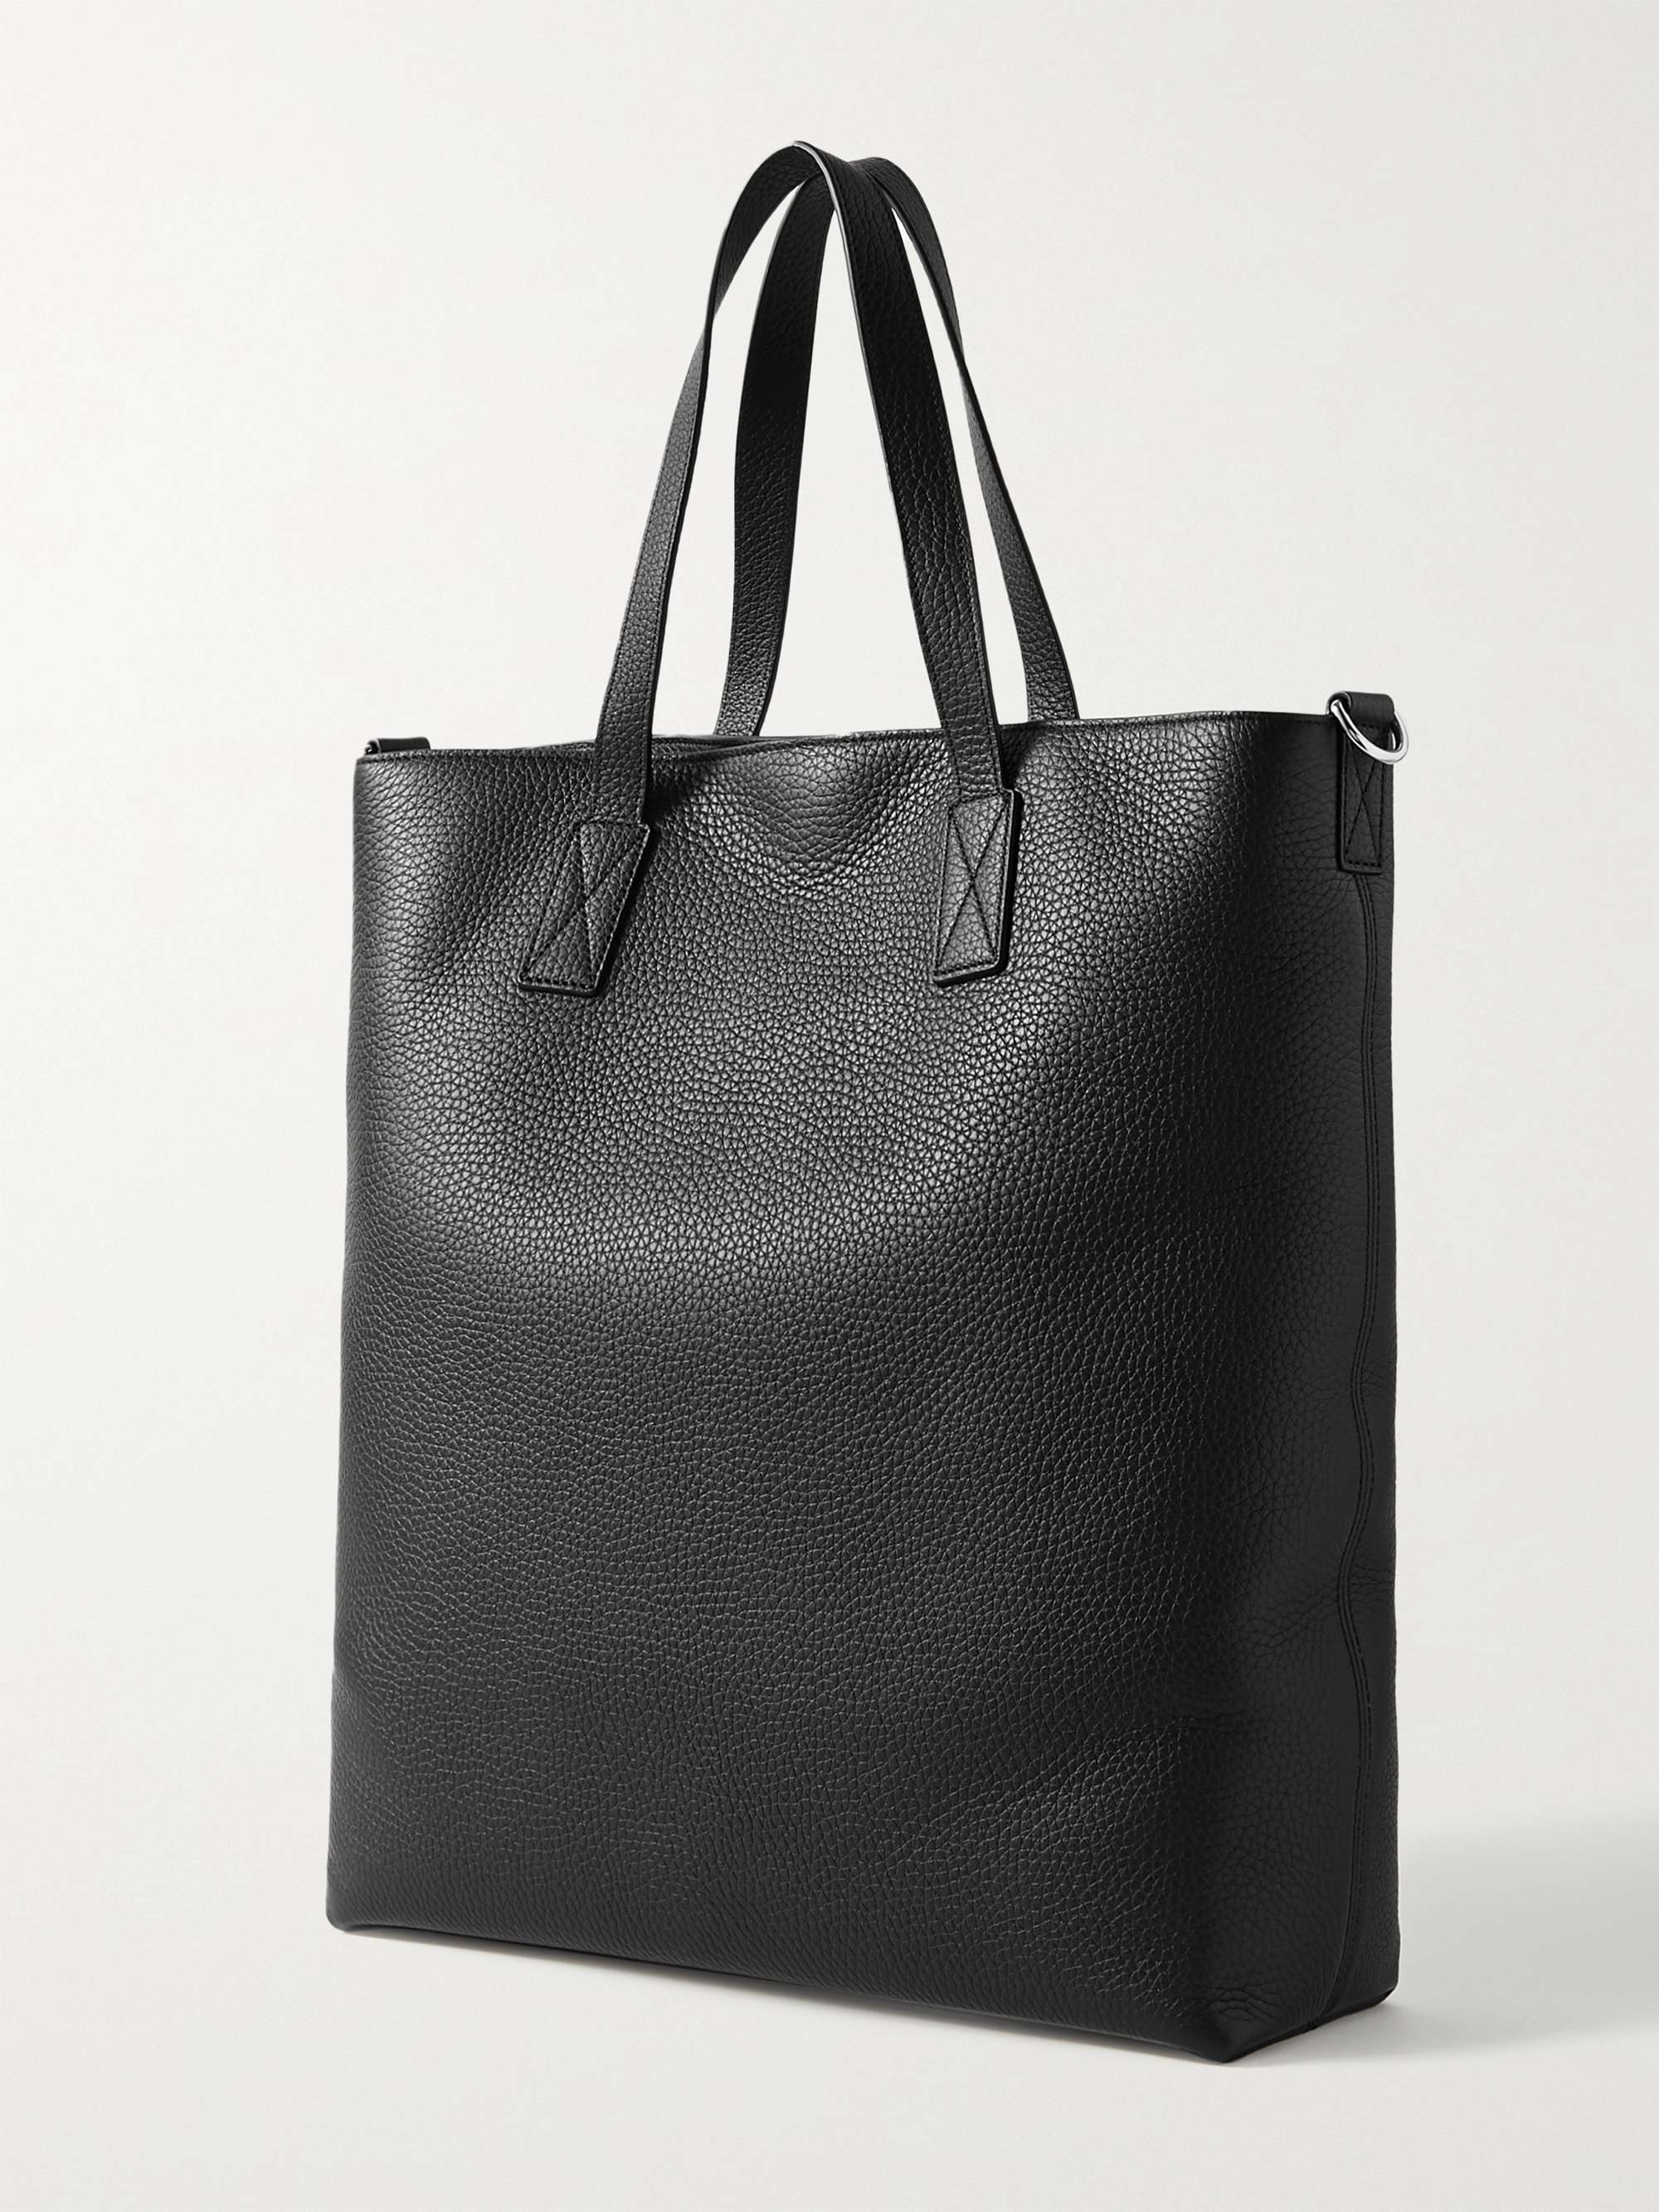 MULBERRY Bryn Full-Grain Leather Tote Bag